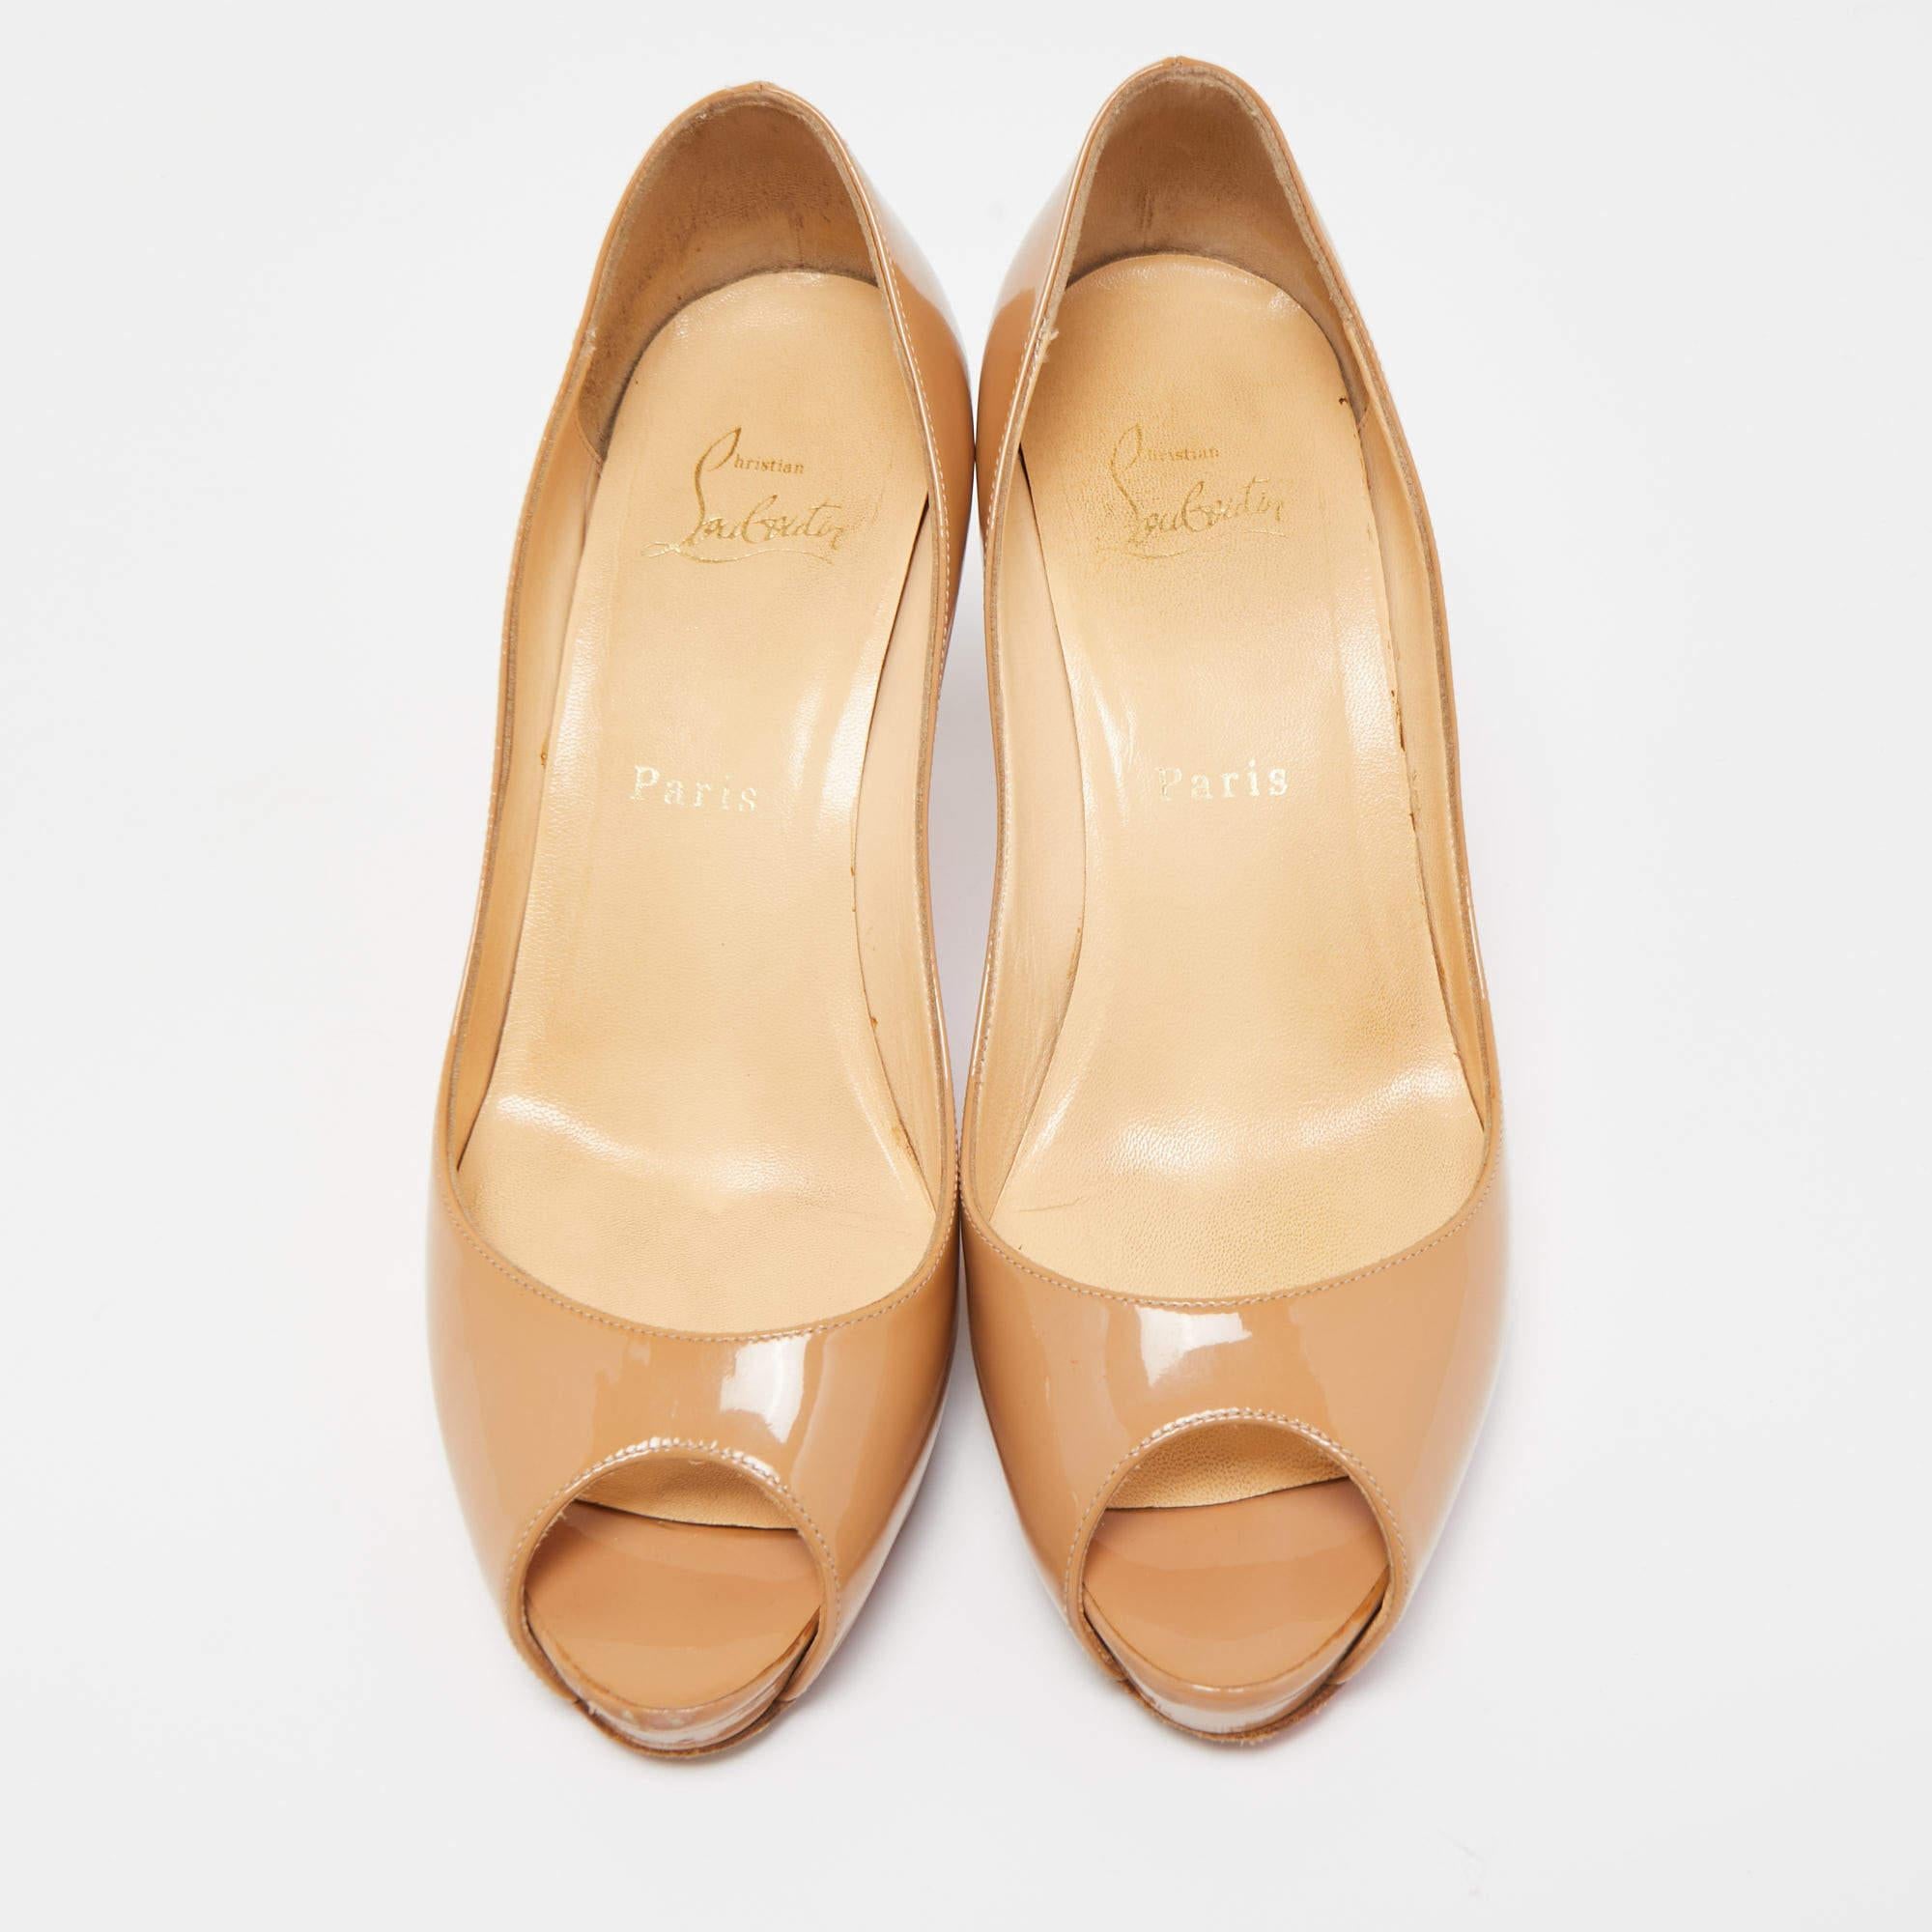 Women's Christian Louboutin Beige Patent Leather Very Prive Pumps Size 37 For Sale